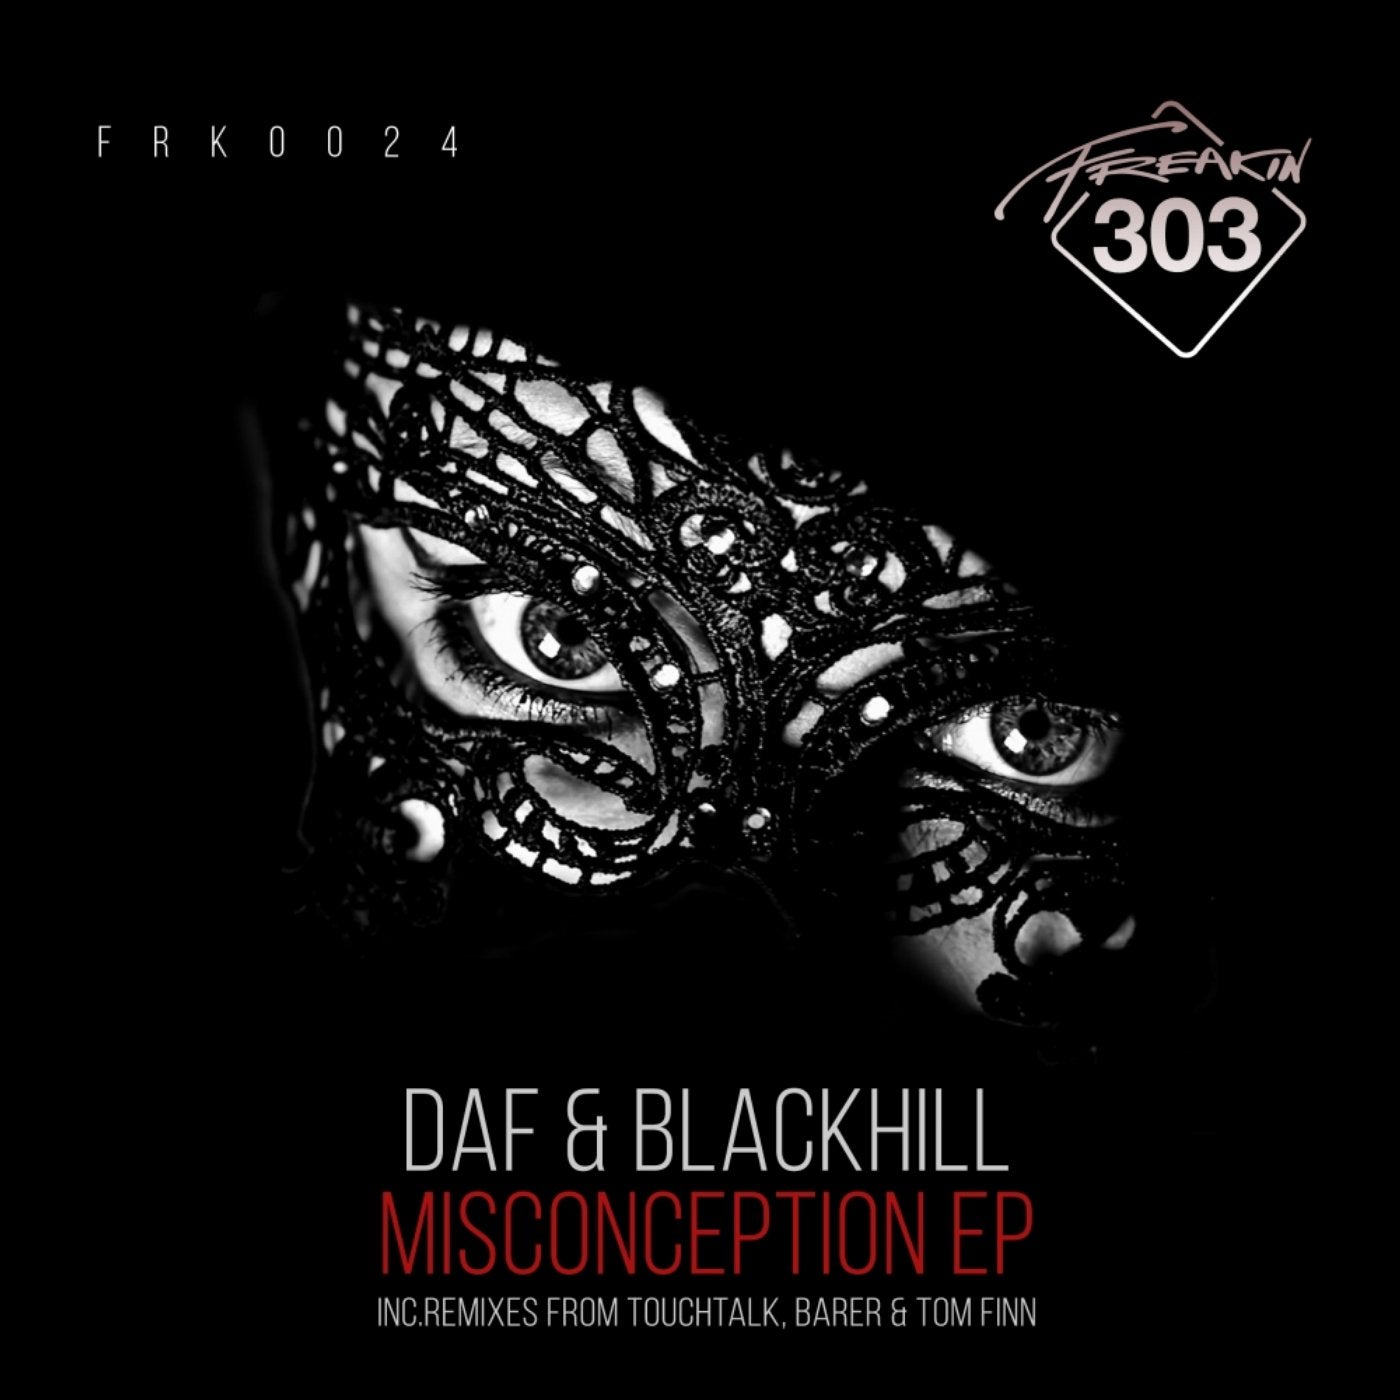 Misconception EP